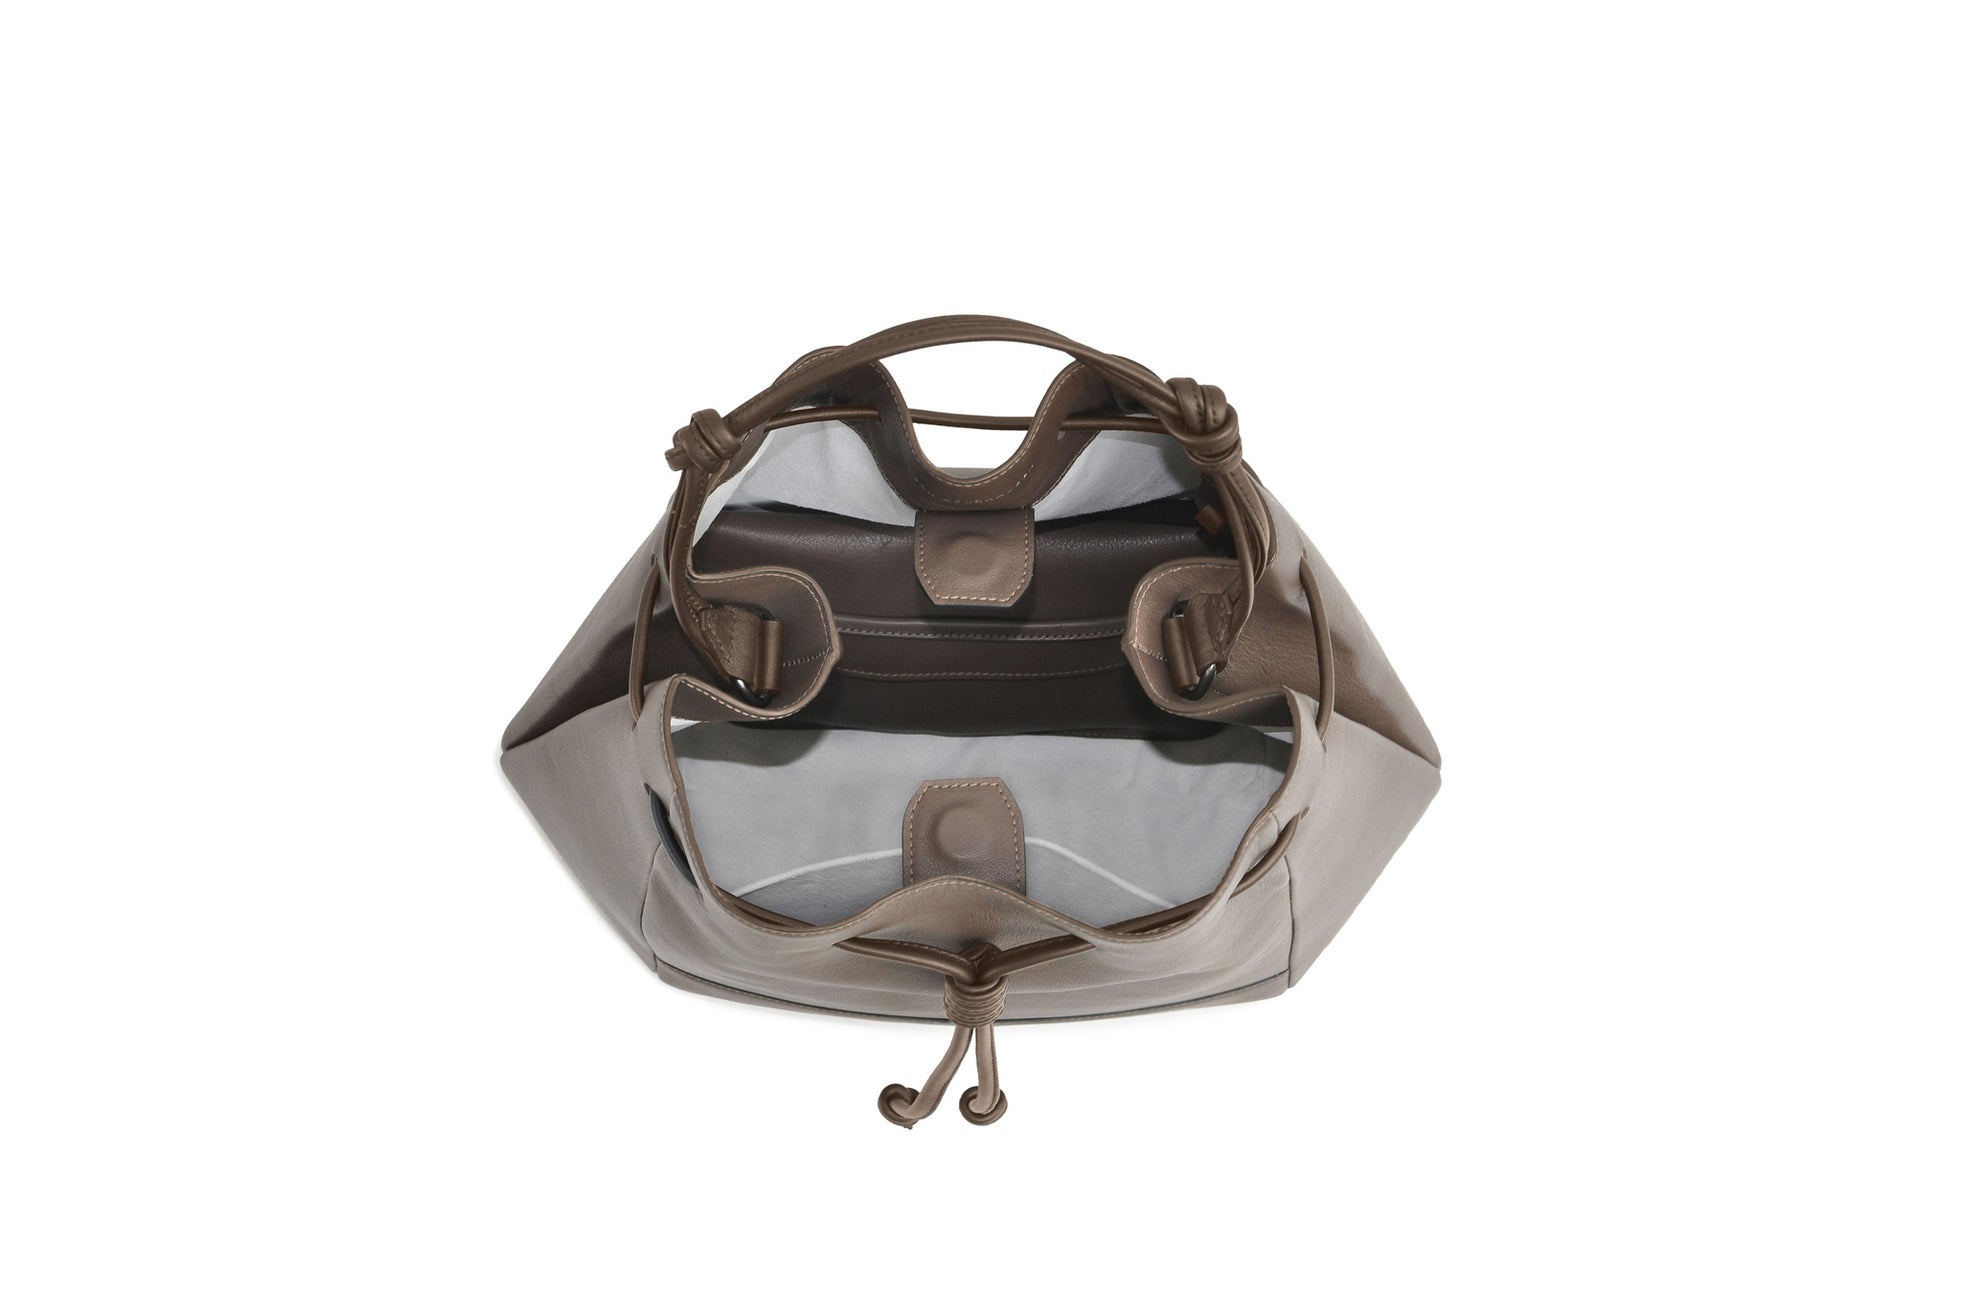 The Large Bucket Backpack - Sample Sale in Technik in Taupe image 